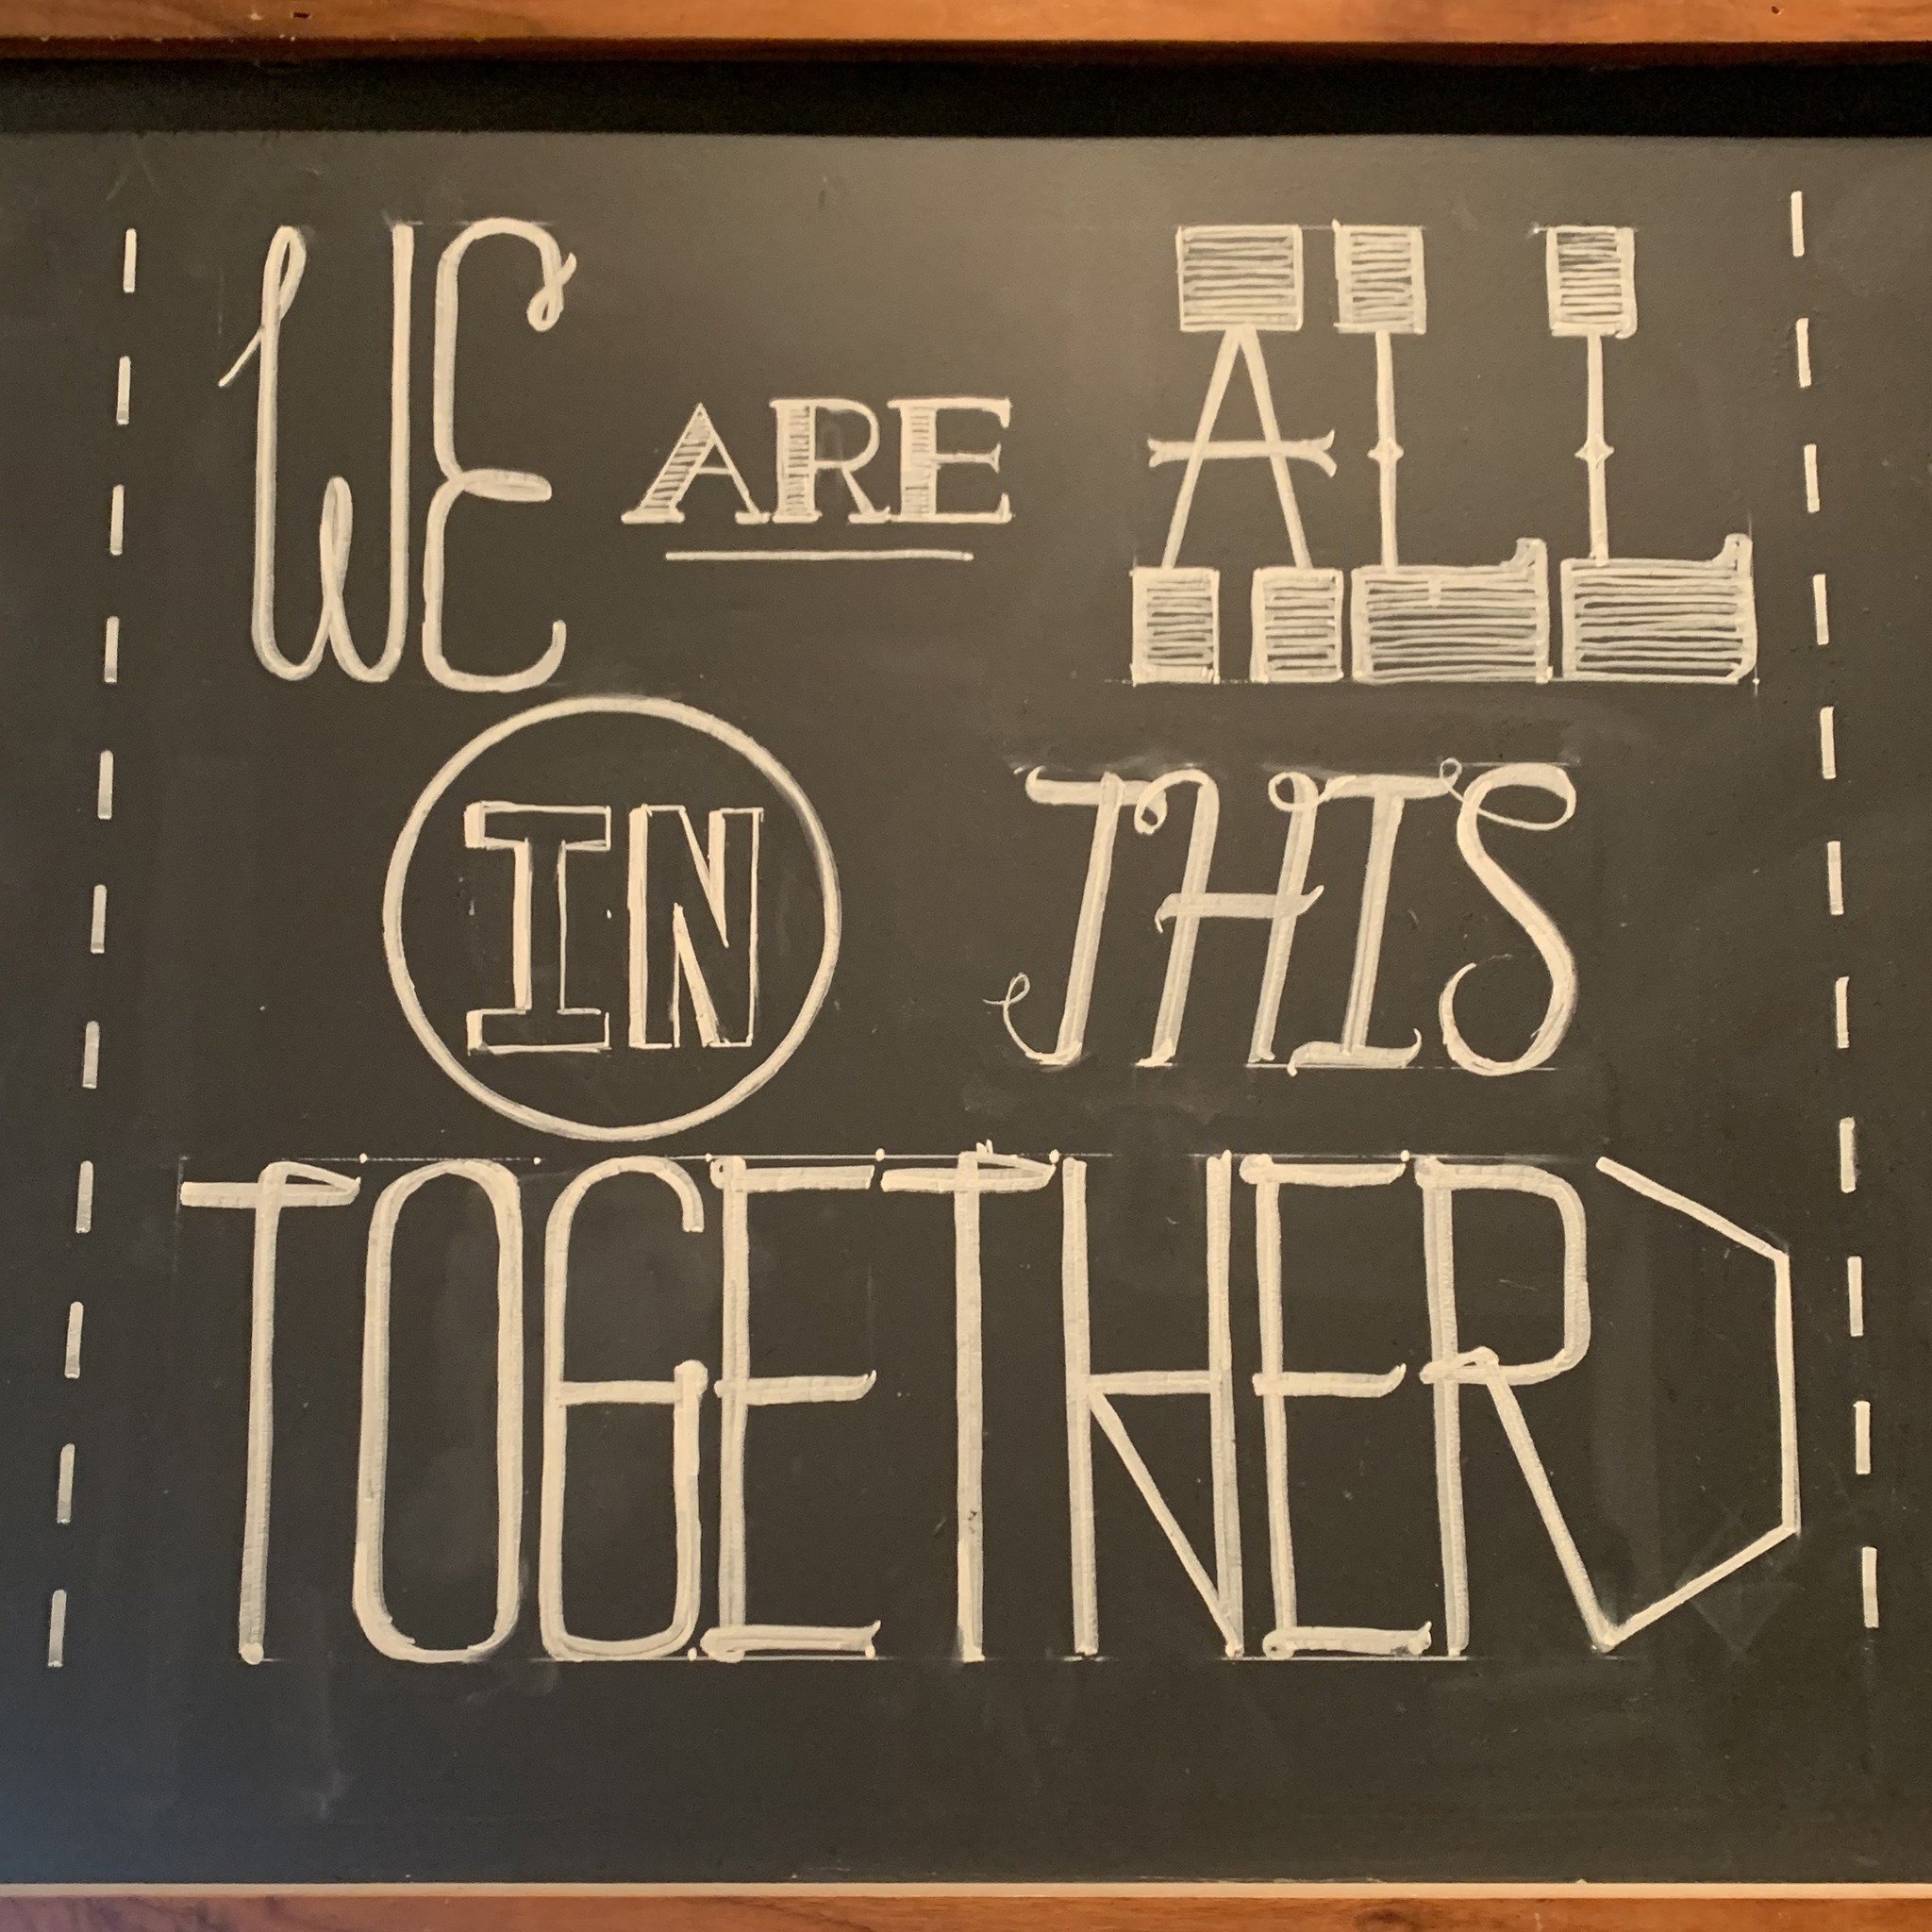 Words to live by... Let's take care of one another TODAY! 🩷

#inspirationfortheday #togetherness #supporteachother #chalkboardmessage